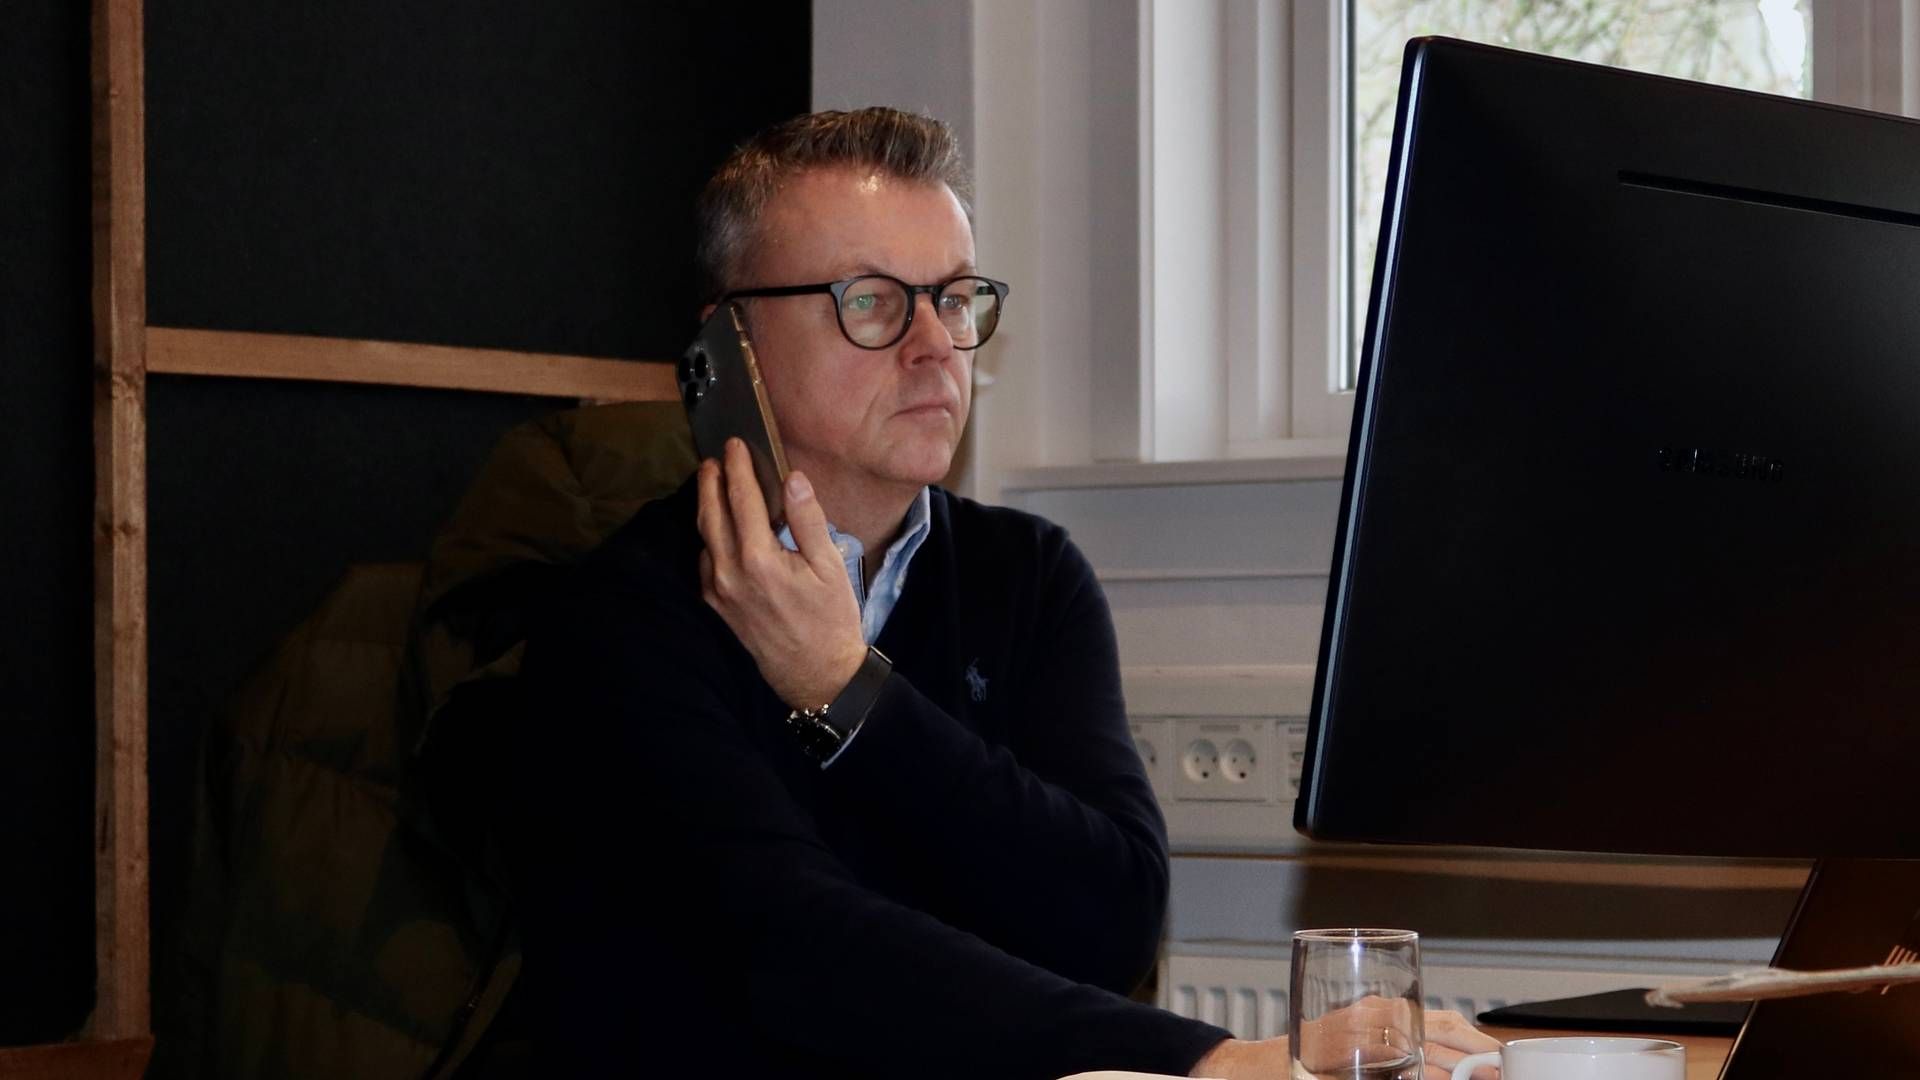 Michael Stig Nielsen at his office in the Danish town of Slagelse, not far from his private residence. | Photo: Pr-foto